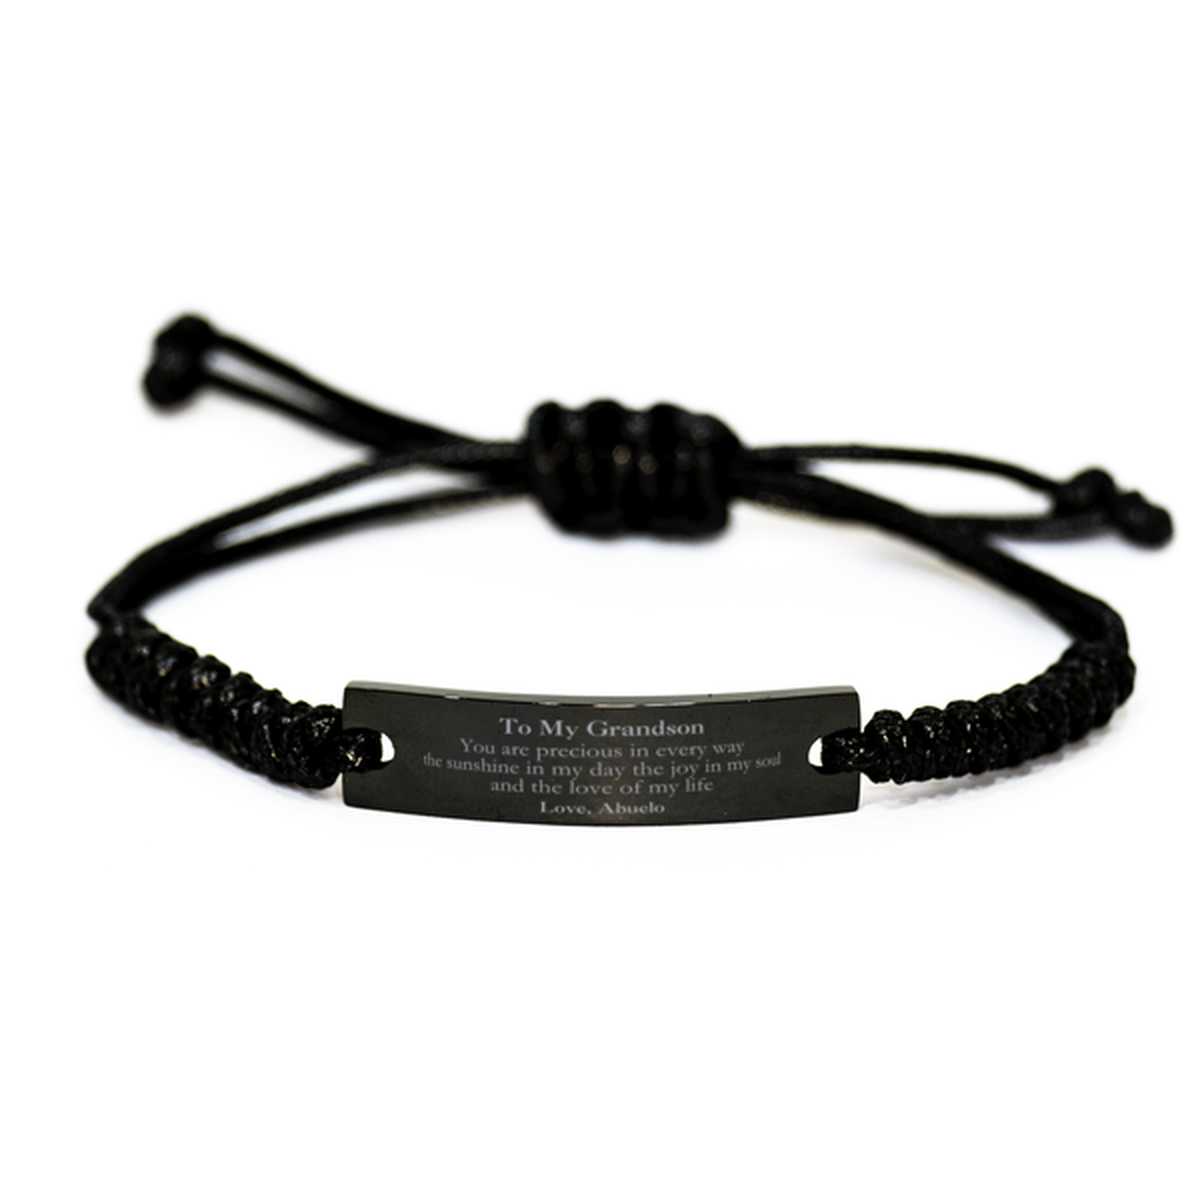 Graduation Gifts for Grandson Black Rope Bracelet Present from Abuelo, Christmas Grandson Birthday Gifts Grandson You are precious in every way the sunshine in my day. Love, Abuelo